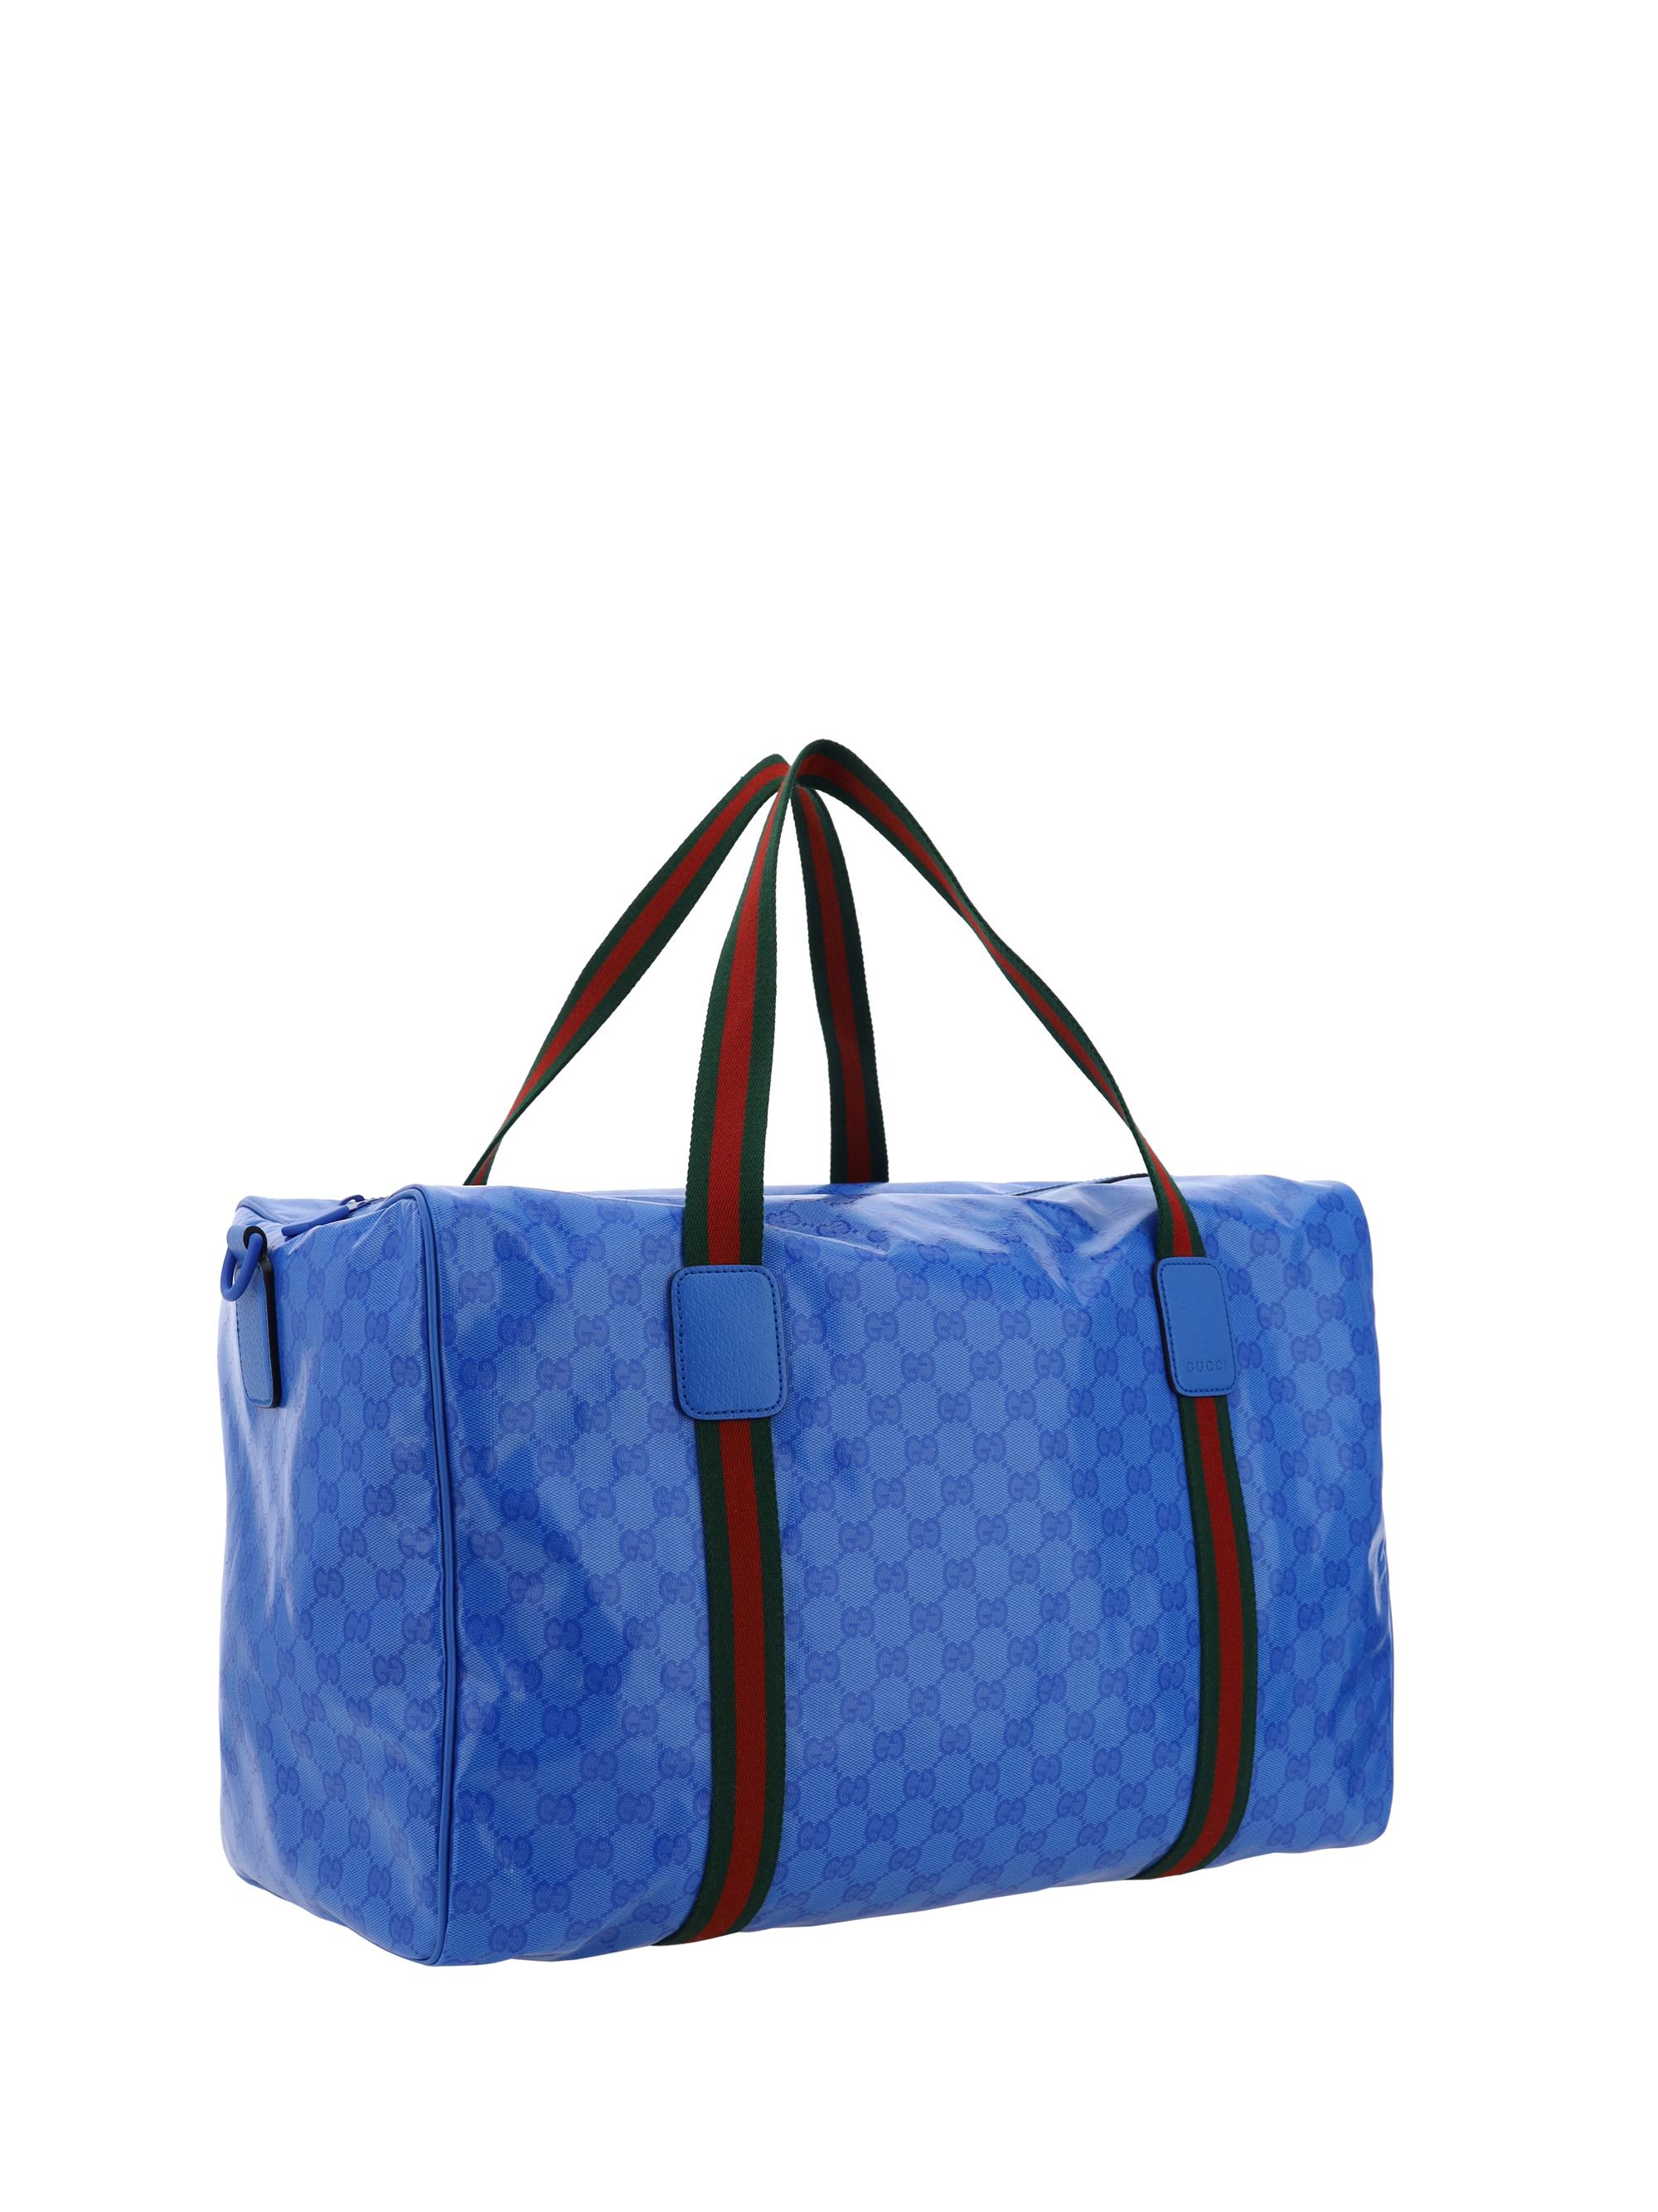 Large duffle bag with Web in blue GG Crystal canvas